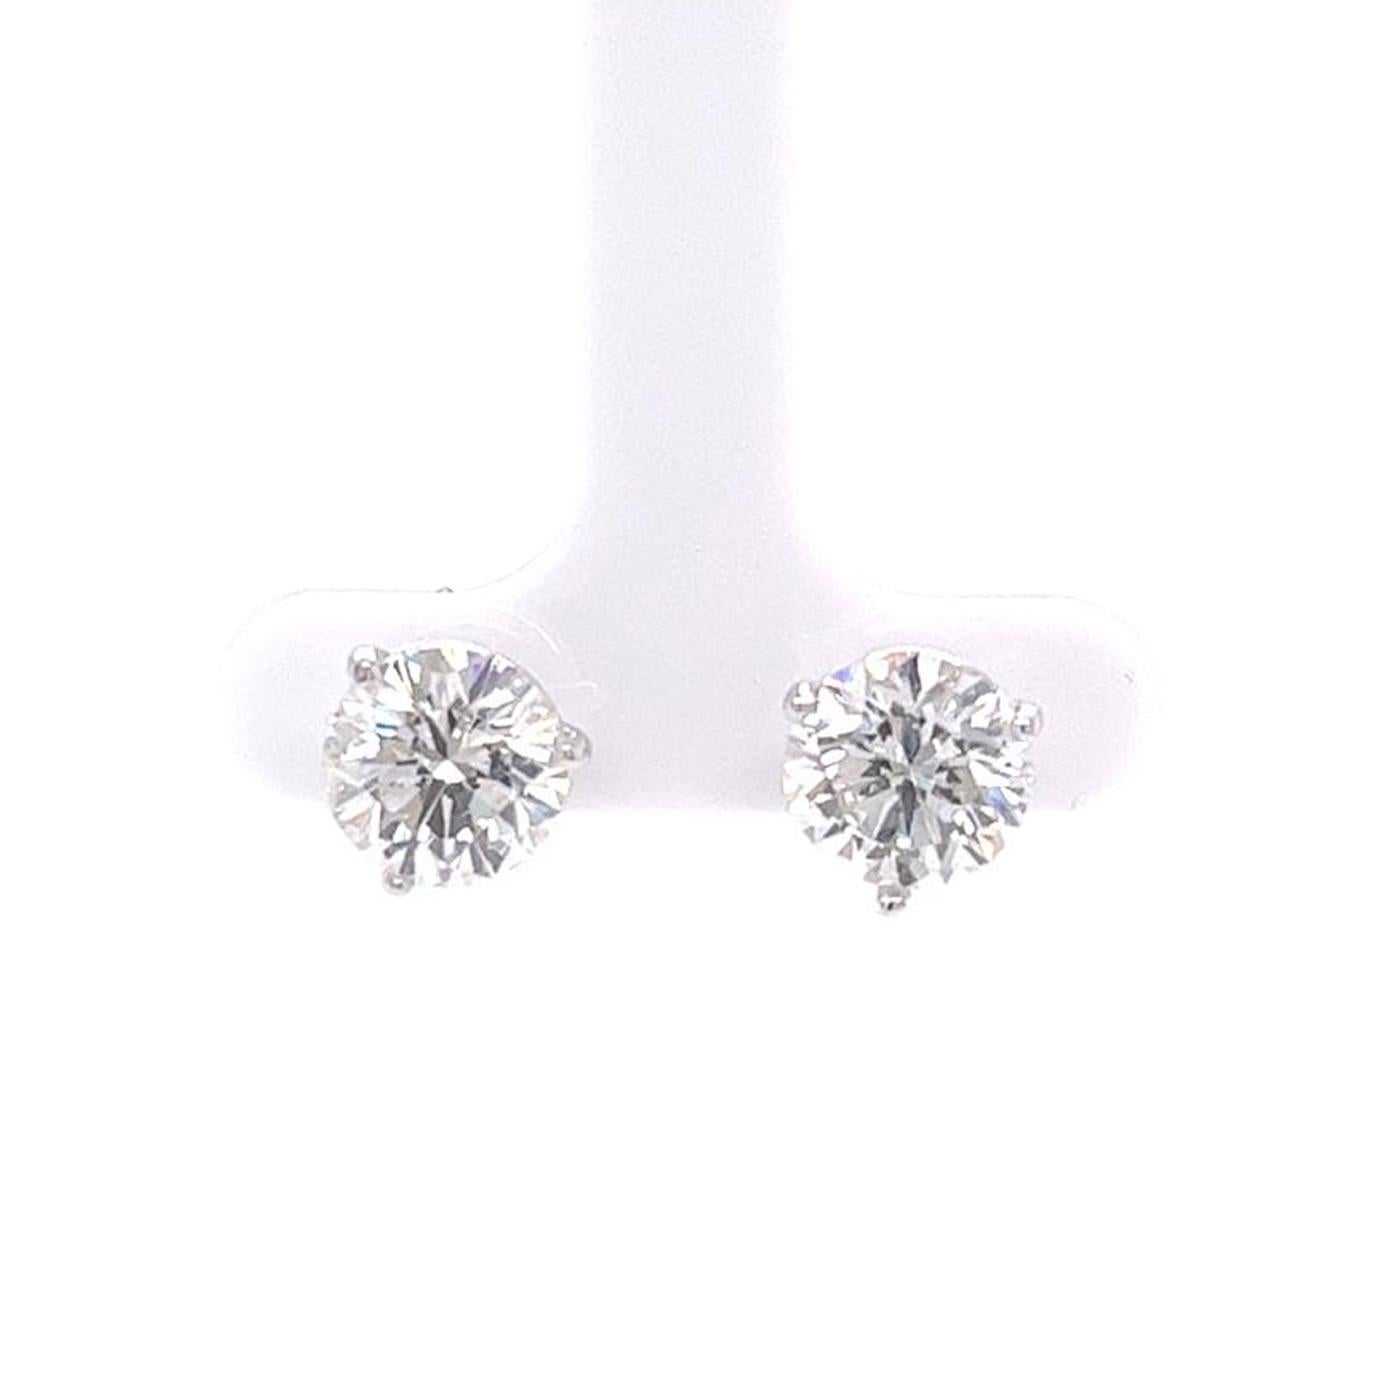 5.19ct Round Natural Diamonds Martini Setting 3 Prong Studs Earrings For Sale 1